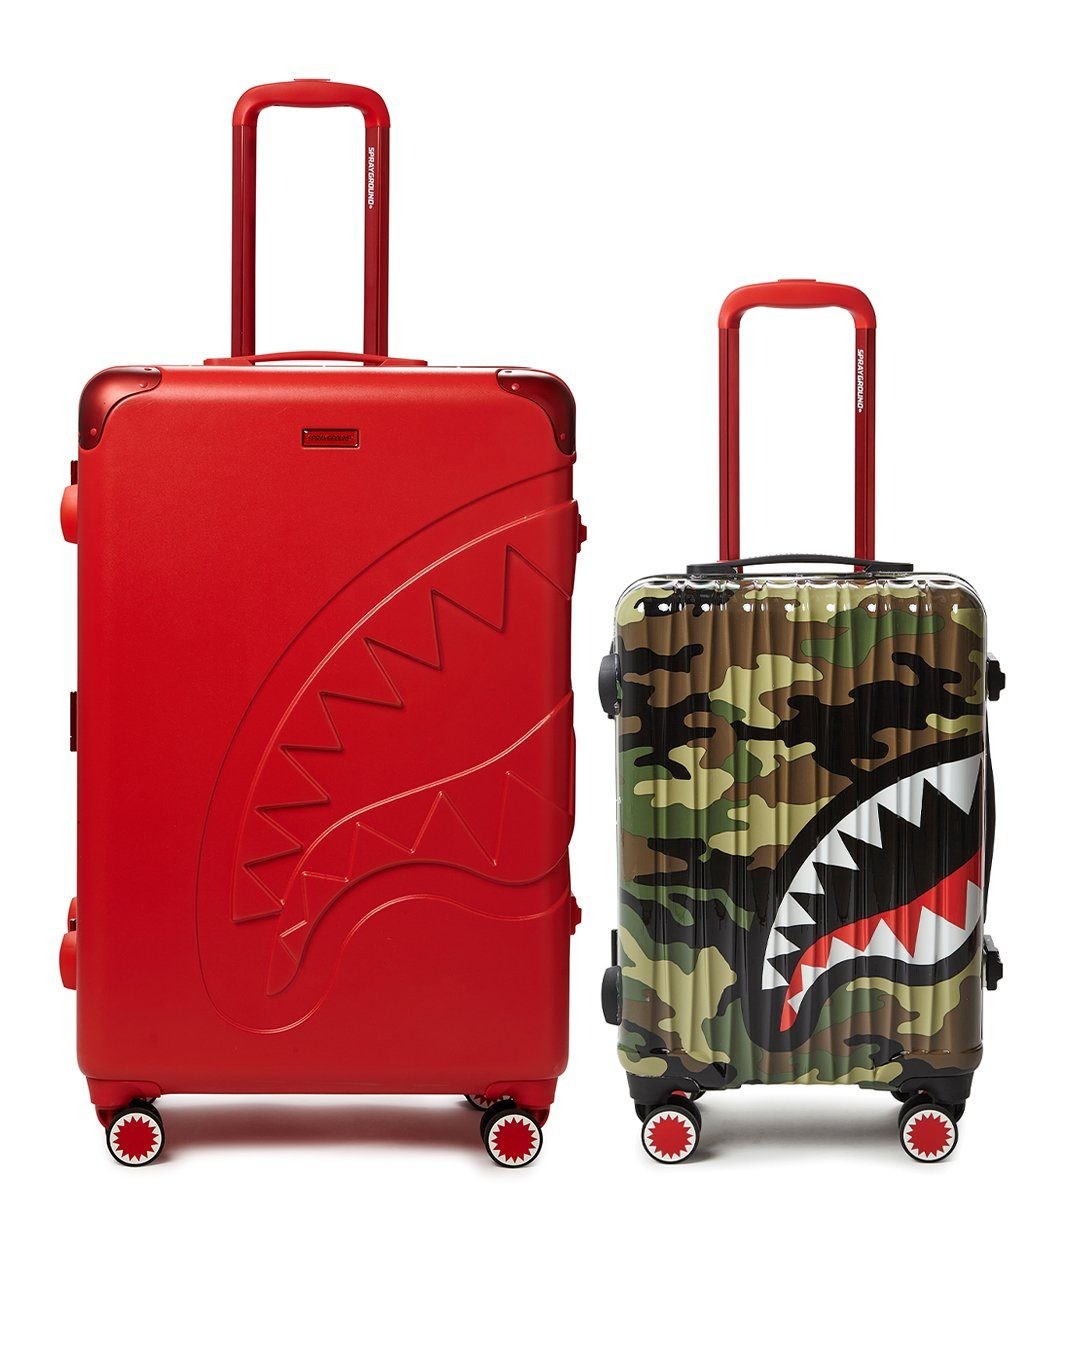 Discount | Full-Size Red Carry-On Camo Luggage Bundle Sprayground Sale - Discount | Full-Size Red Carry-On Camo Luggage Bundle Sprayground Sale-01-0